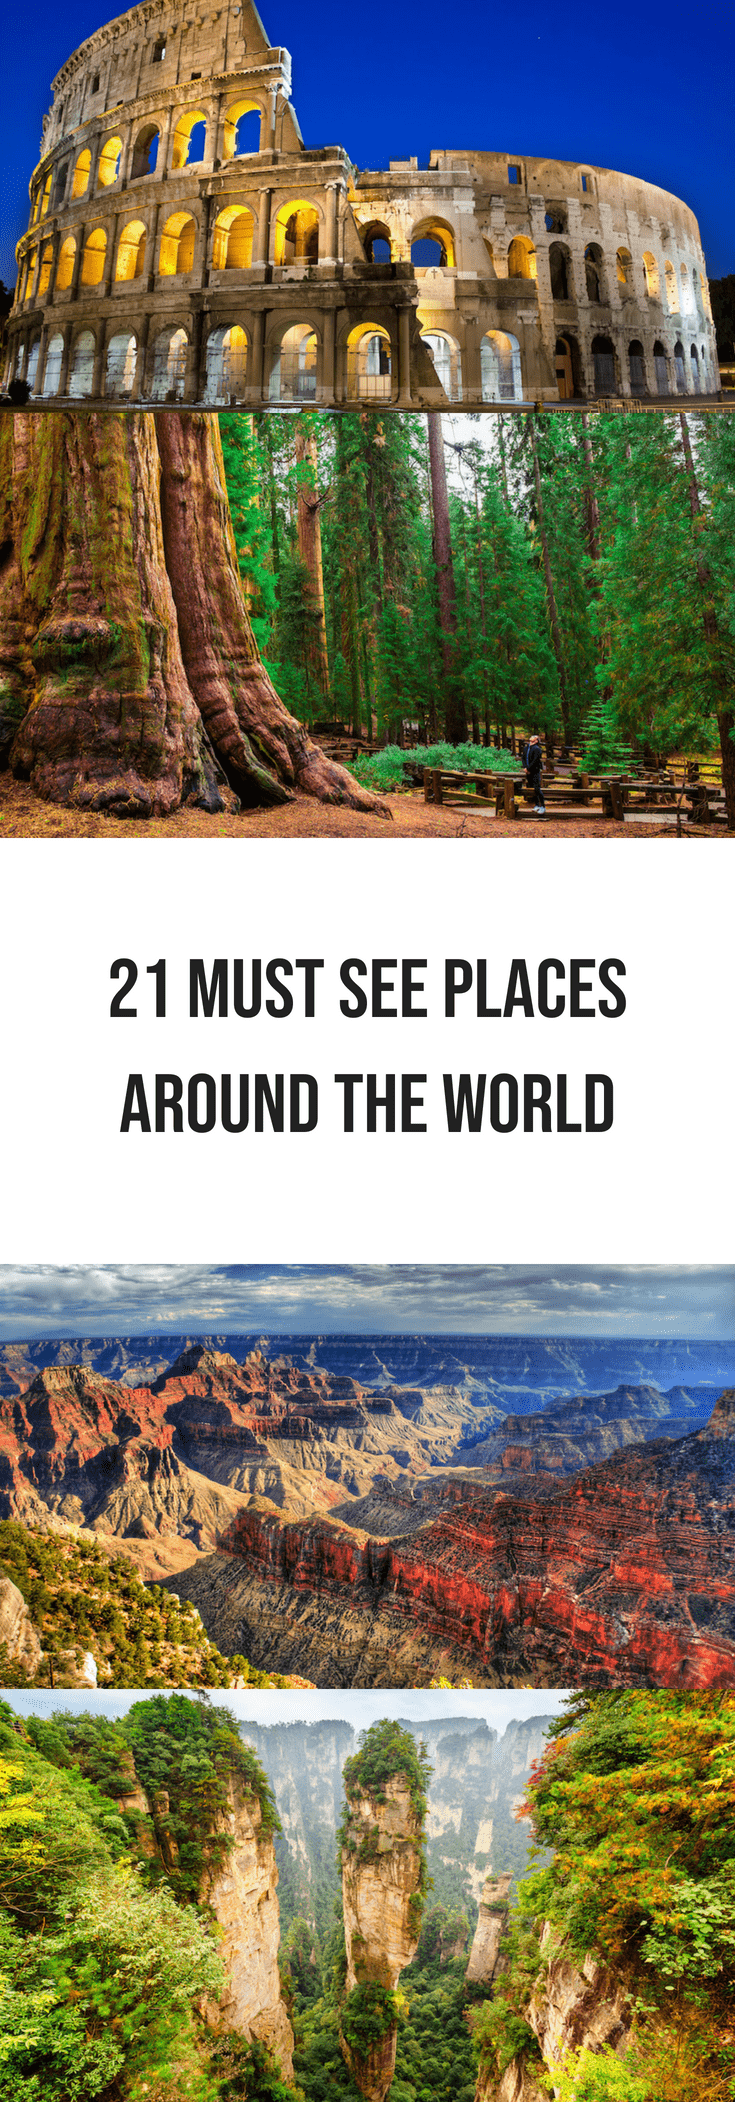 21 Must See Places Around The World